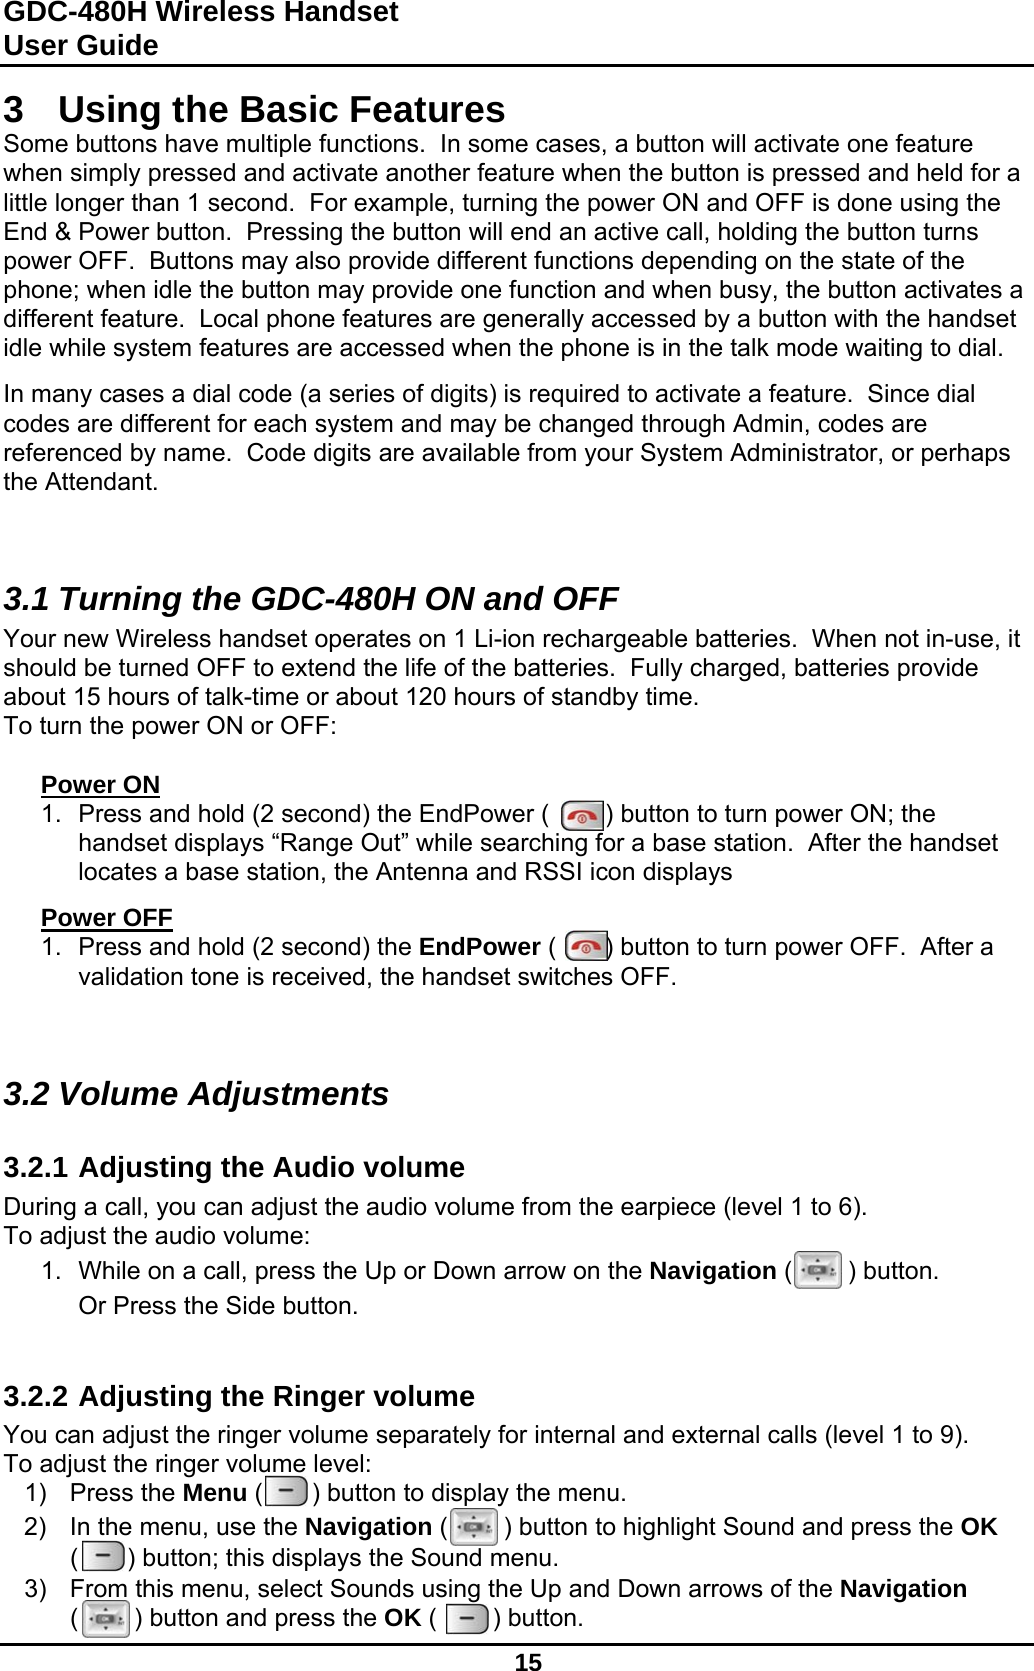 GDC-480H Wireless Handset User Guide   15  3  Using the Basic Features Some buttons have multiple functions.  In some cases, a button will activate one feature when simply pressed and activate another feature when the button is pressed and held for a little longer than 1 second.  For example, turning the power ON and OFF is done using the End &amp; Power button.  Pressing the button will end an active call, holding the button turns power OFF.  Buttons may also provide different functions depending on the state of the phone; when idle the button may provide one function and when busy, the button activates a different feature.  Local phone features are generally accessed by a button with the handset idle while system features are accessed when the phone is in the talk mode waiting to dial.  In many cases a dial code (a series of digits) is required to activate a feature.  Since dial codes are different for each system and may be changed through Admin, codes are referenced by name.  Code digits are available from your System Administrator, or perhaps the Attendant.   3.1 Turning the GDC-480H ON and OFF Your new Wireless handset operates on 1 Li-ion rechargeable batteries.  When not in-use, it should be turned OFF to extend the life of the batteries.  Fully charged, batteries provide about 15 hours of talk-time or about 120 hours of standby time. To turn the power ON or OFF:  Power ON 1.  Press and hold (2 second) the EndPower (        ) button to turn power ON; the handset displays “Range Out” while searching for a base station.  After the handset locates a base station, the Antenna and RSSI icon displays   Power OFF 1.  Press and hold (2 second) the EndPower (       ) button to turn power OFF.  After a validation tone is received, the handset switches OFF.   3.2 Volume Adjustments  3.2.1 Adjusting the Audio volume During a call, you can adjust the audio volume from the earpiece (level 1 to 6). To adjust the audio volume: 1.  While on a call, press the Up or Down arrow on the Navigation (        ) button.  Or Press the Side button.   3.2.2 Adjusting the Ringer volume You can adjust the ringer volume separately for internal and external calls (level 1 to 9). To adjust the ringer volume level: 1) Press the Menu (       ) button to display the menu. 2)  In the menu, use the Navigation (        ) button to highlight Sound and press the OK (       ) button; this displays the Sound menu. 3)  From this menu, select Sounds using the Up and Down arrows of the Navigation (        ) button and press the OK (        ) button.  